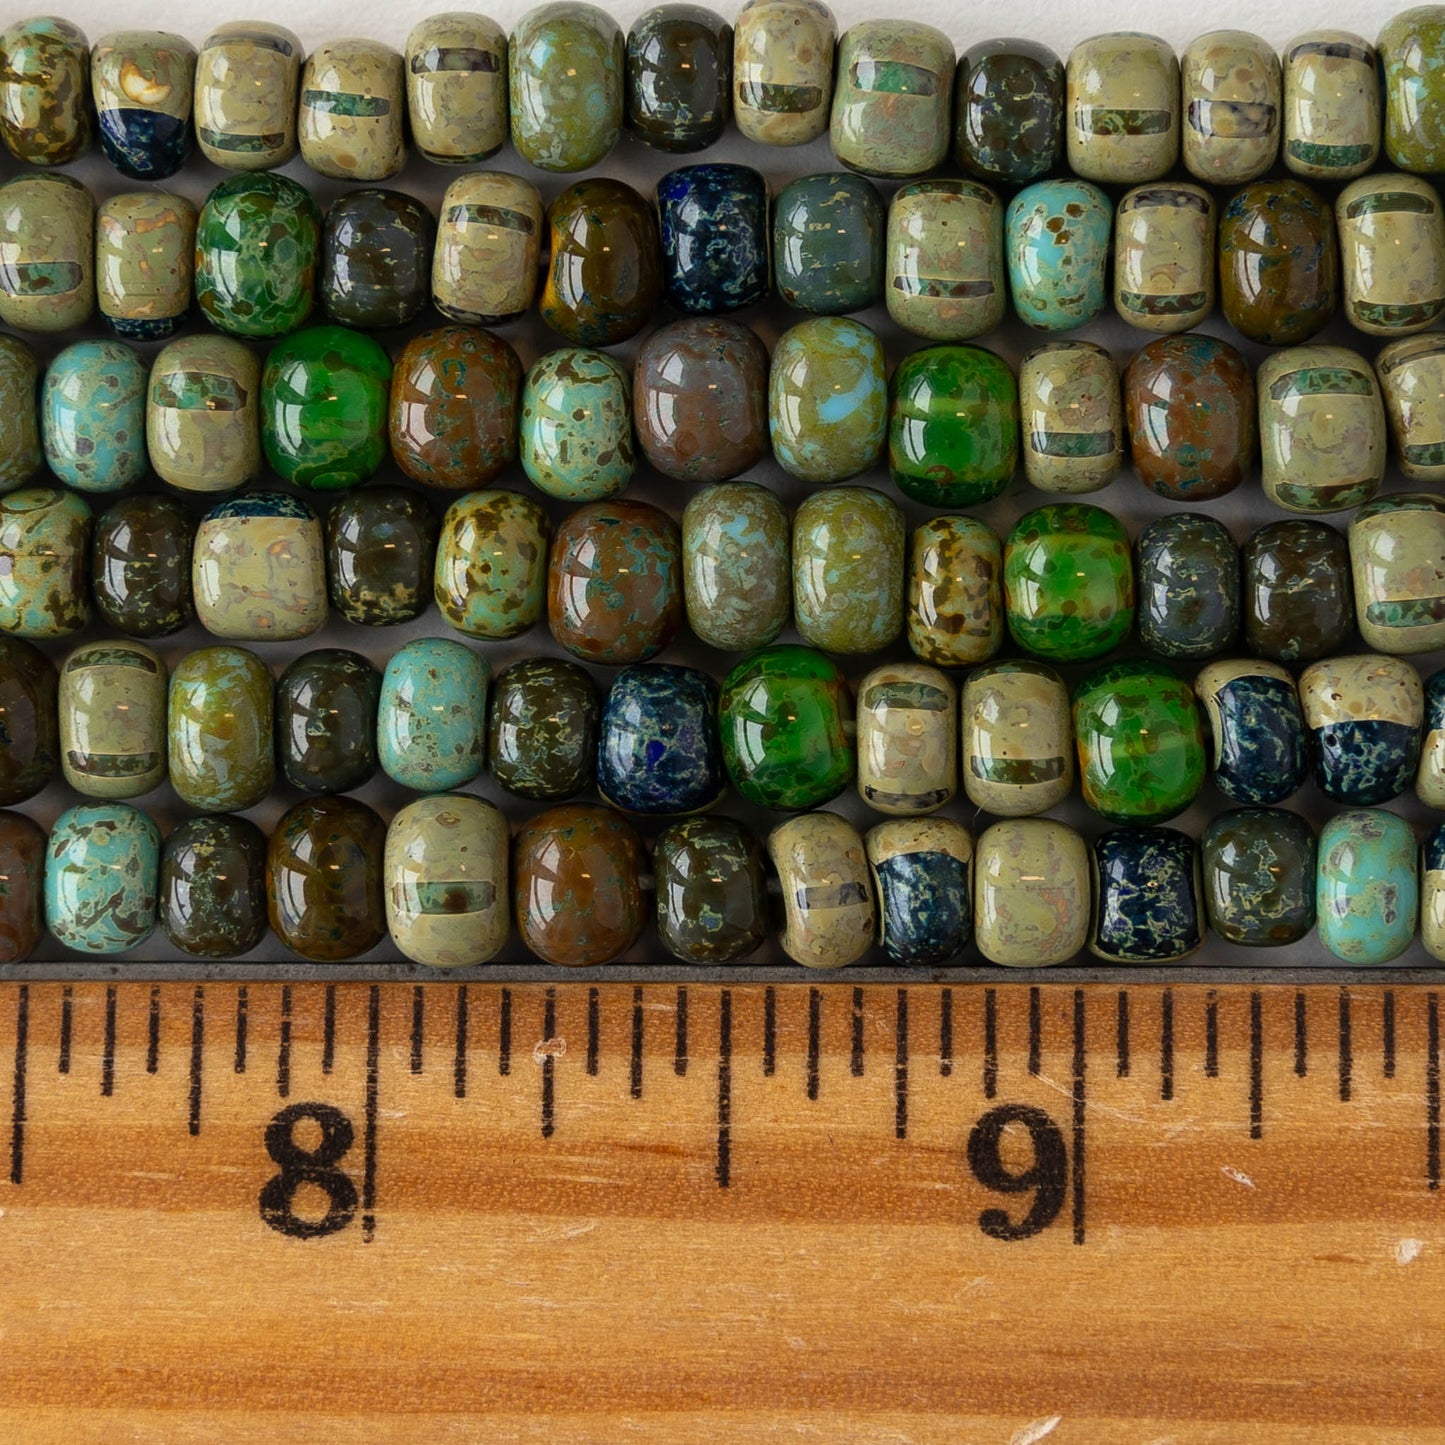 Size 2/0-3/0 Seed Bead Mix - Aged Neptune Striped Mix - 10 inches